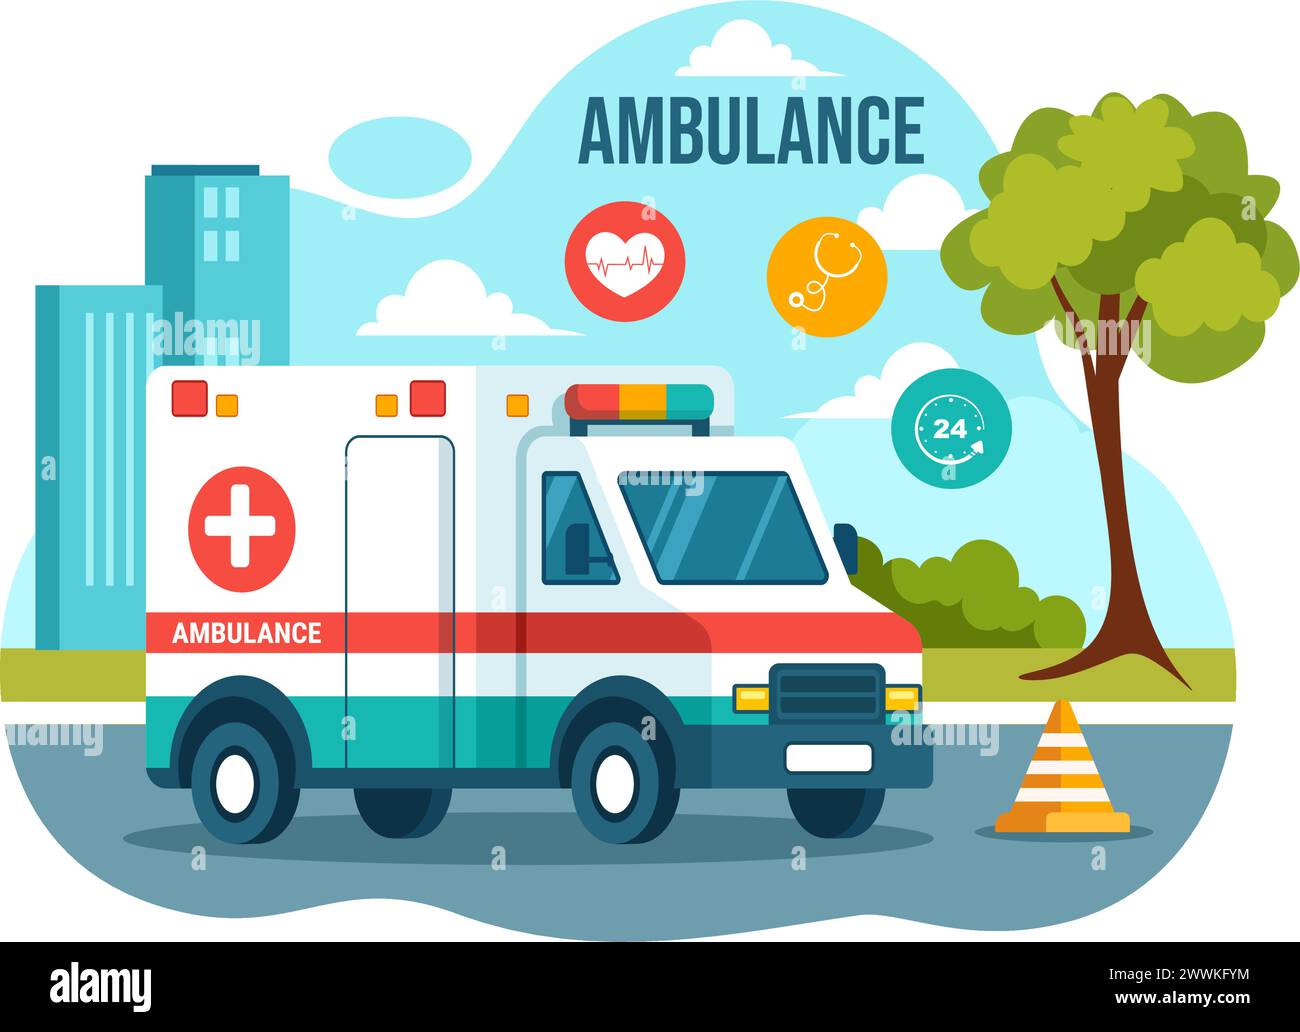 Medical Vehicle Ambulance Car or Emergency Service Vector Illustration for Pick Up Patient the Injured in an Accident in Flat Cartoon Background Stock Vector